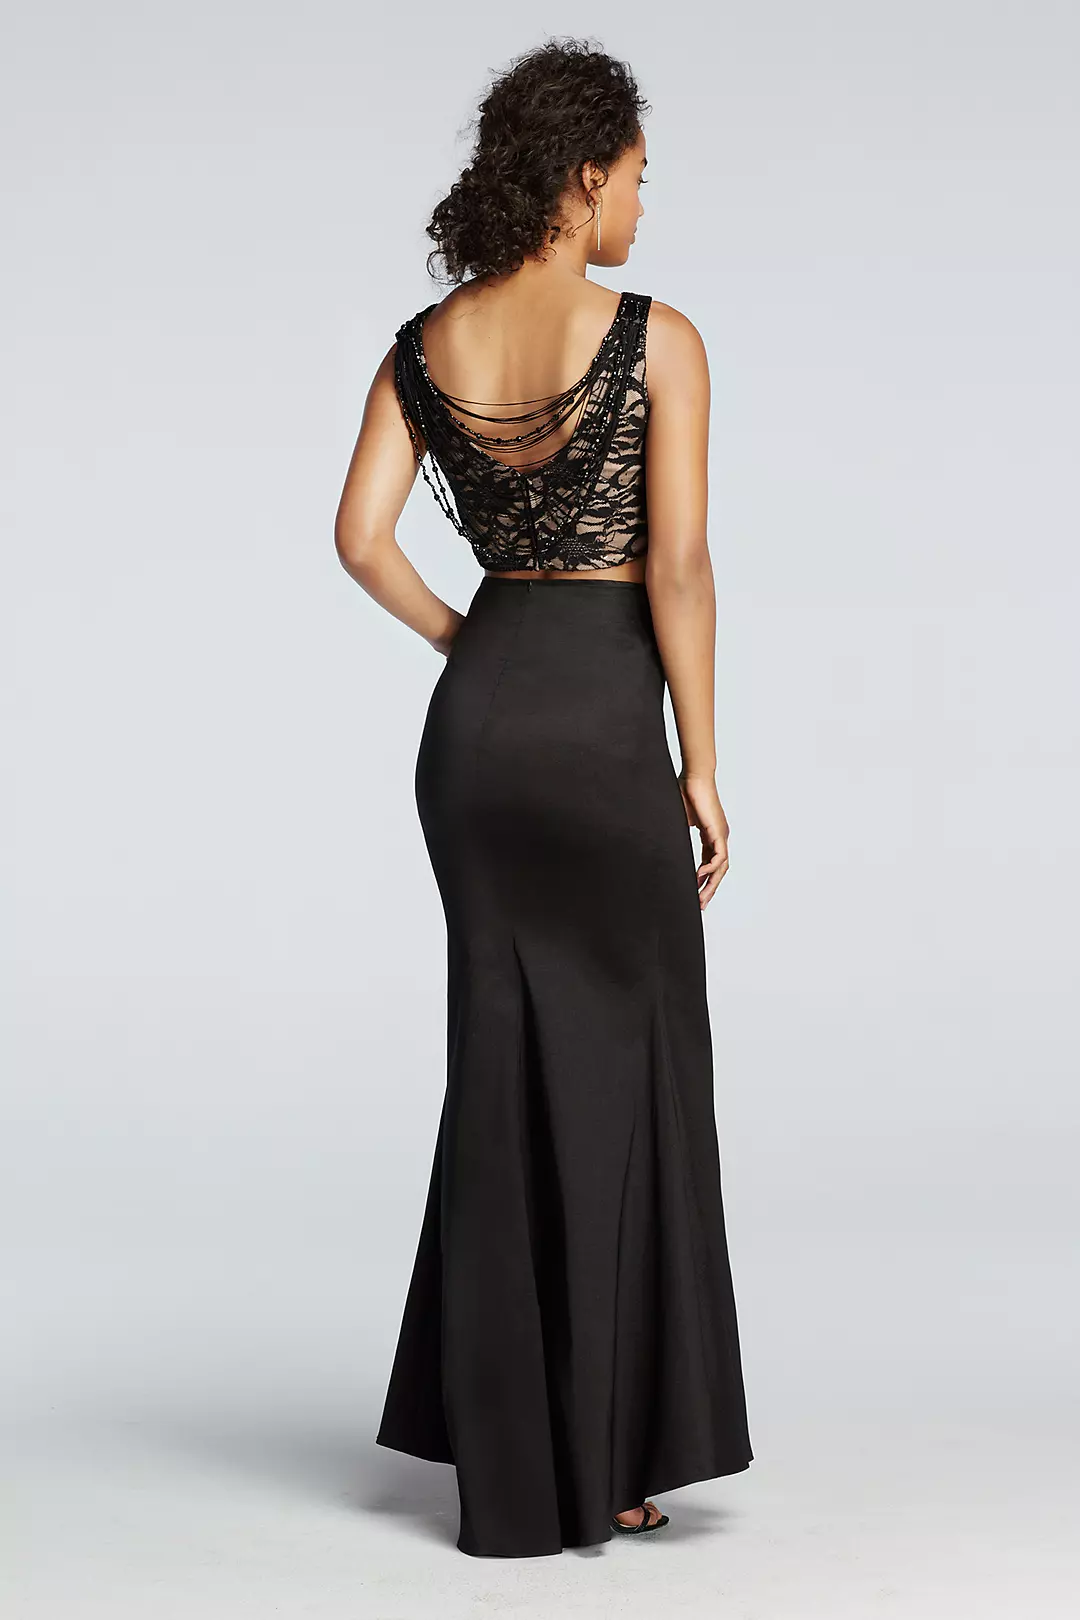 Two Piece Prom Dress with Beaded Back Decoration Image 2